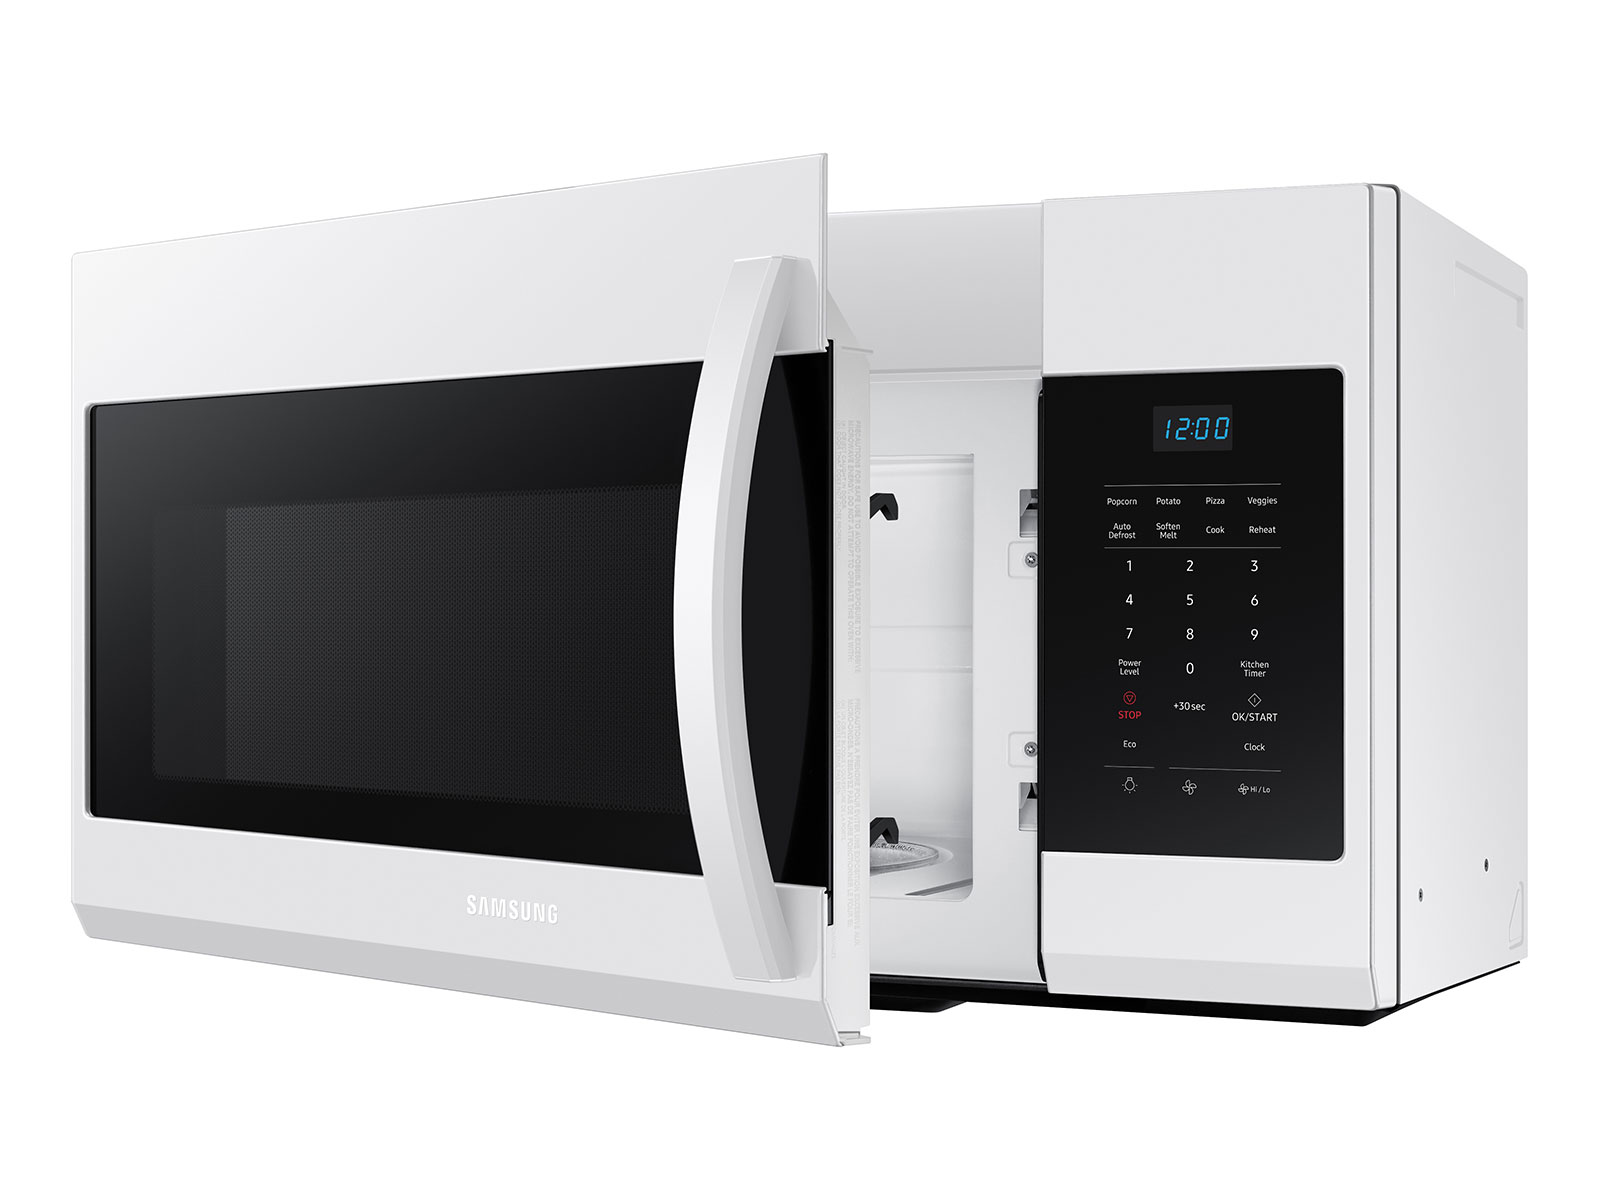 Thumbnail image of 1.7 cu. ft. Over-the-Range Microwave in White